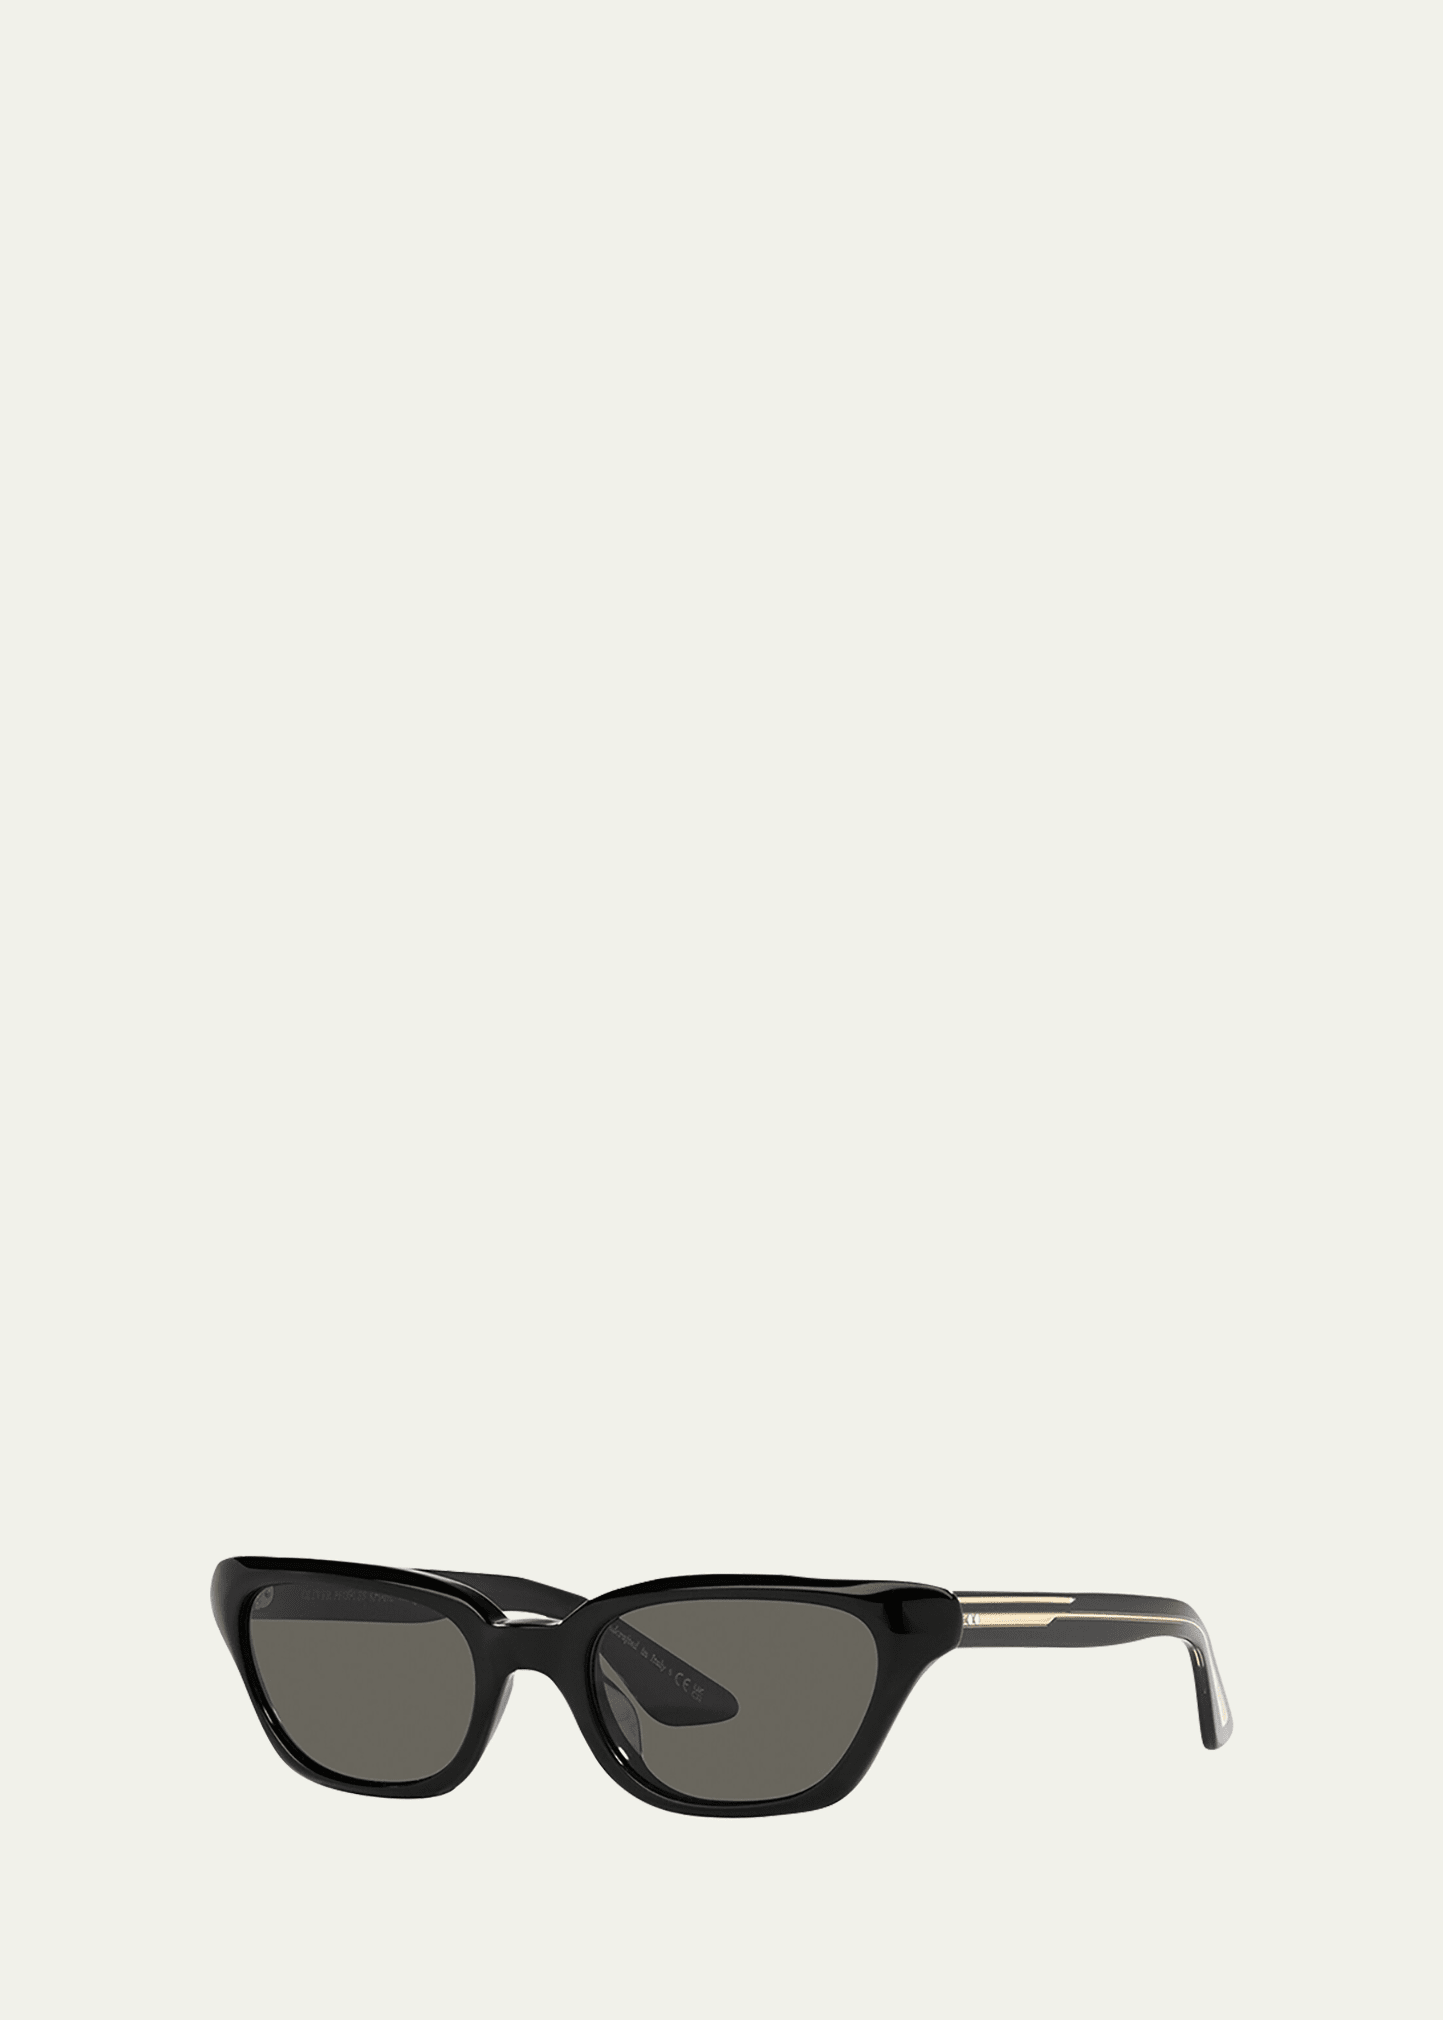 Khaite X Oliver Peoples X Oliver Peoples Acetate Cat-eye Sunglasses In Black 3